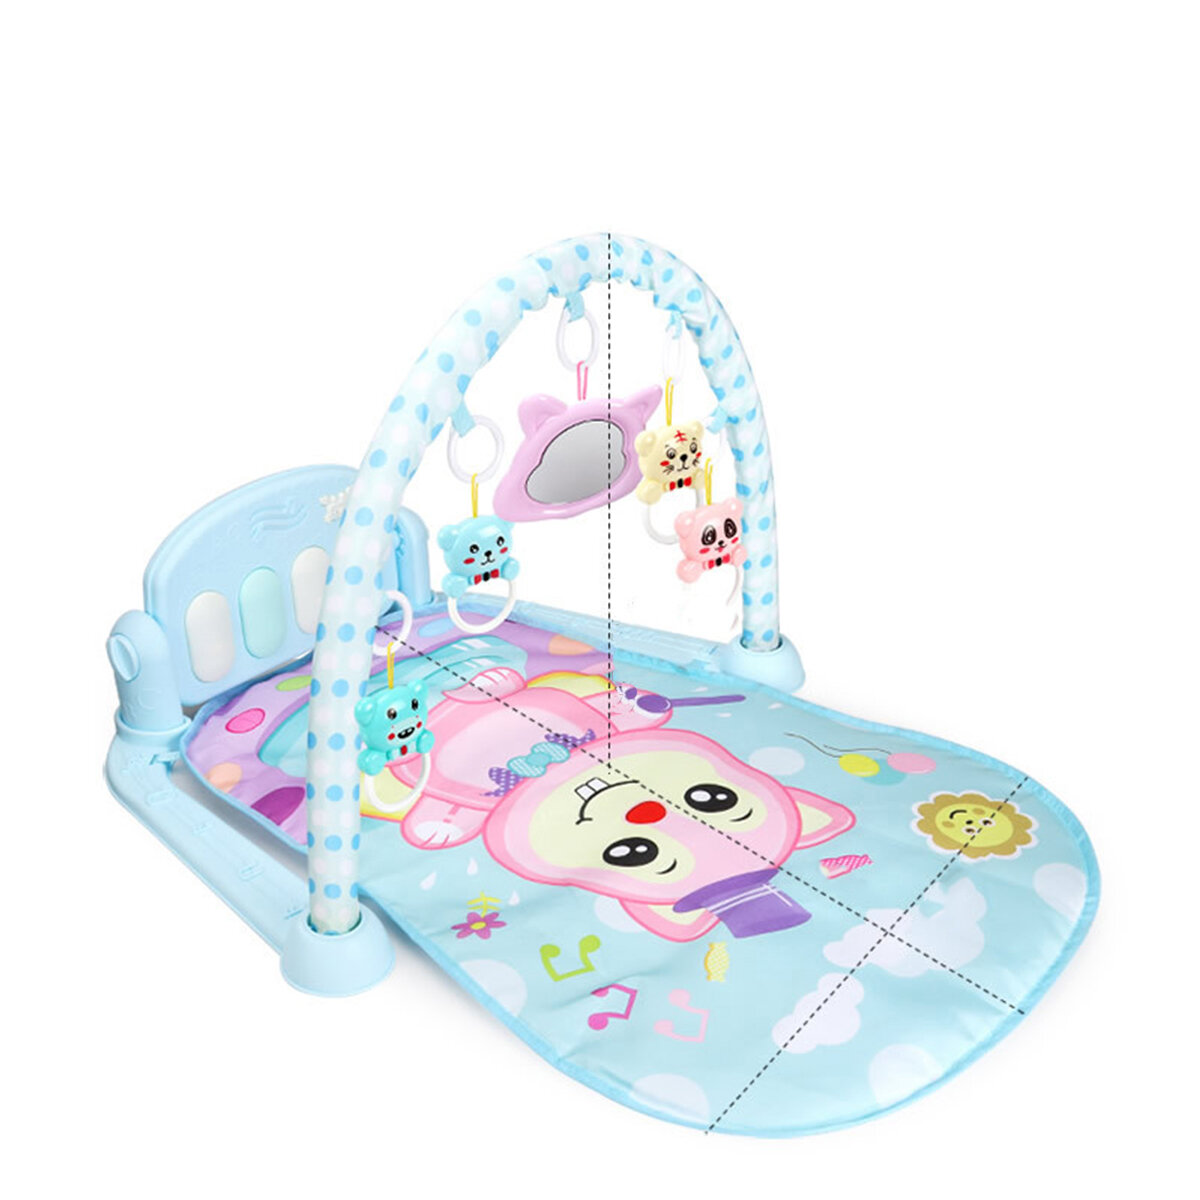 Baby Mini Musical Piano Carpet Educational Toys For 0-36 Months Fitness Play Mat